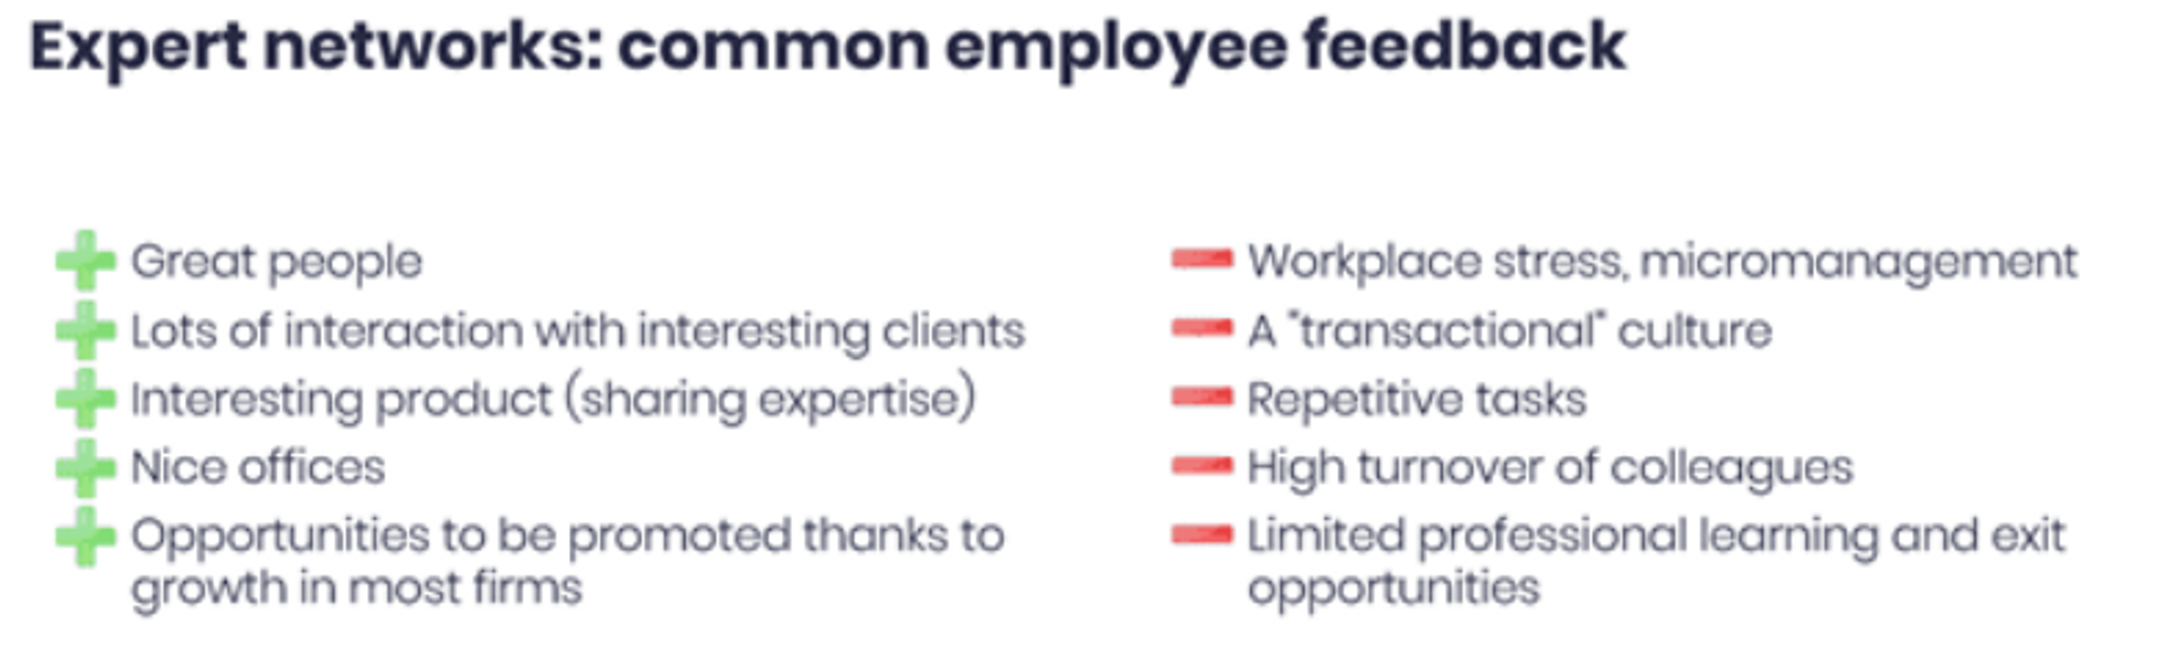 Glassdoor feedback from employees of leading expert networks citing workplace stress, micromanagement, repetitive tasks, limited professional learning and others as their maine issues with their employers